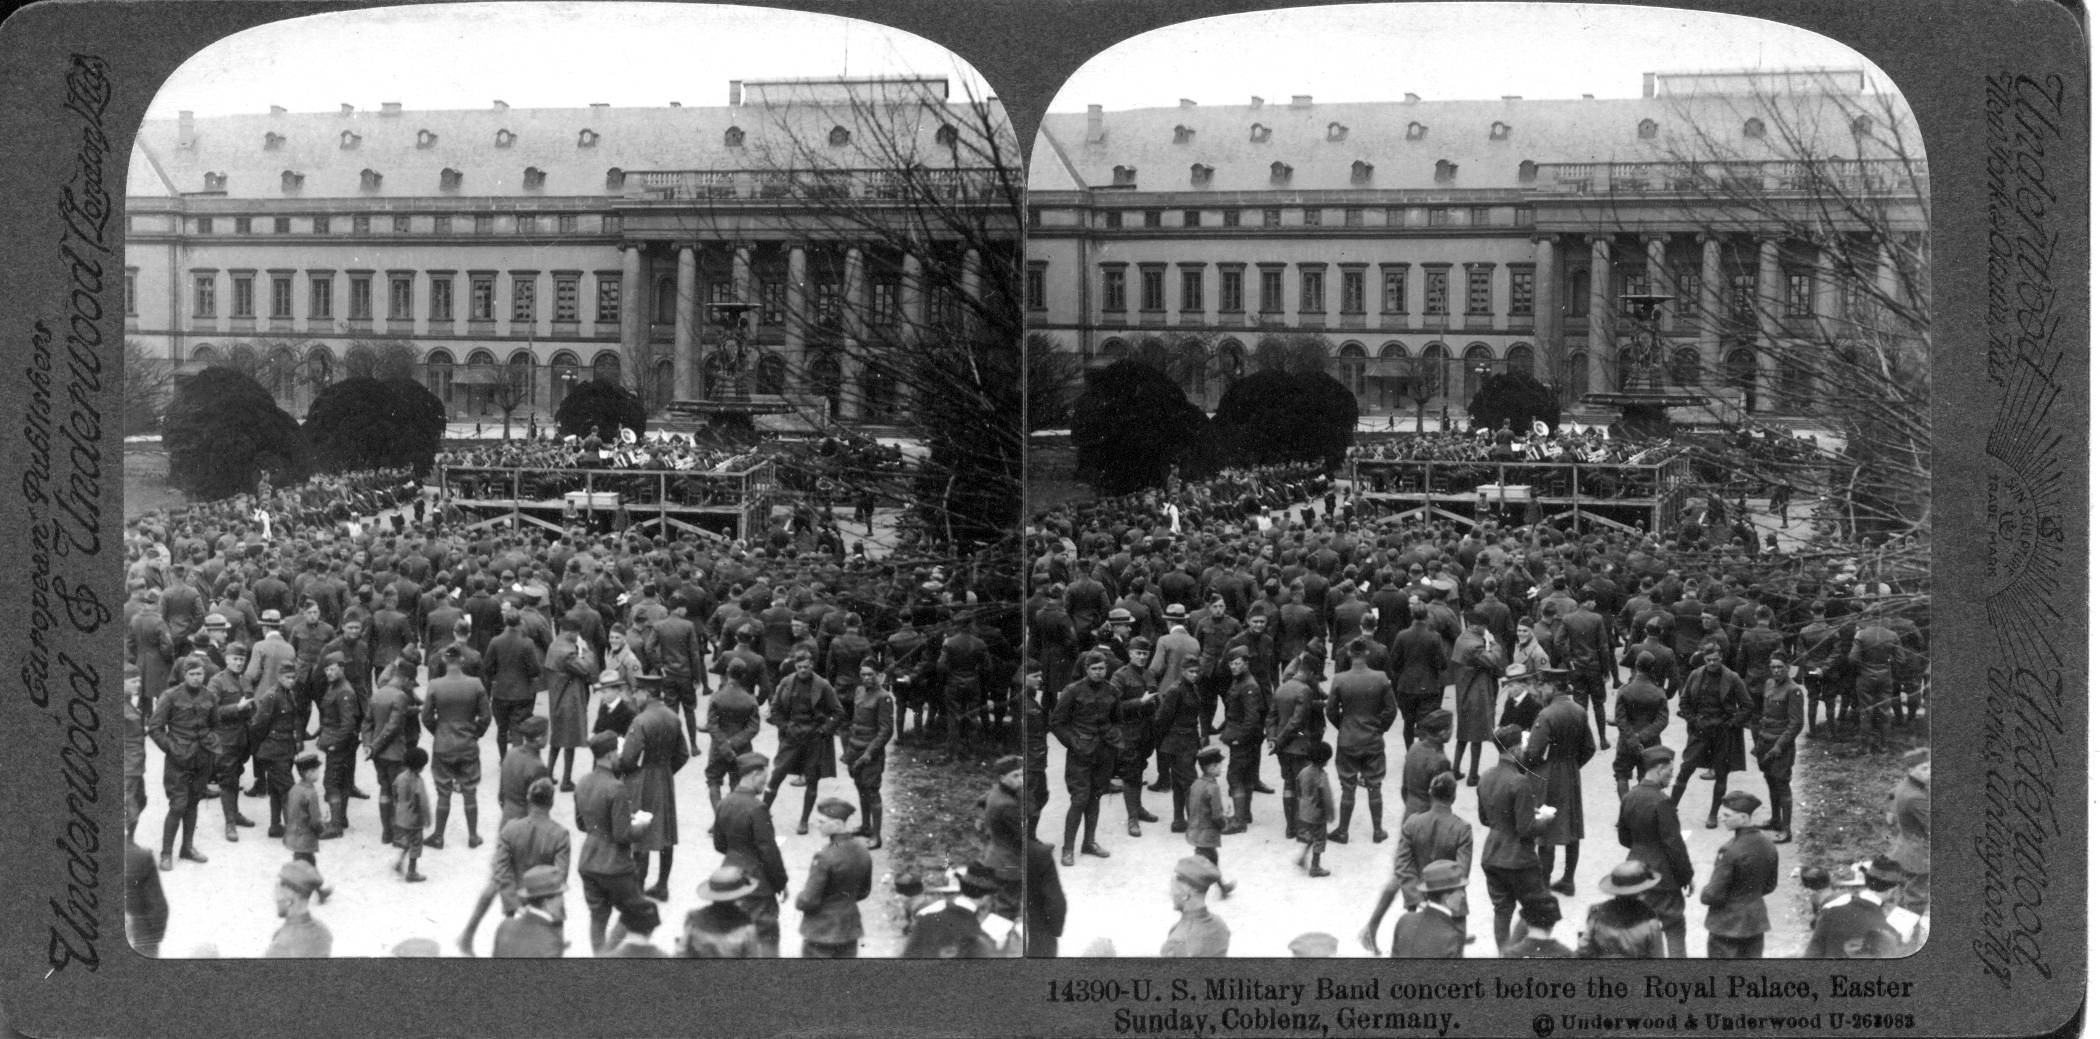 U.S. Military Band concert before the Royal Palace, Easter Sunday, Coblenz, Germany